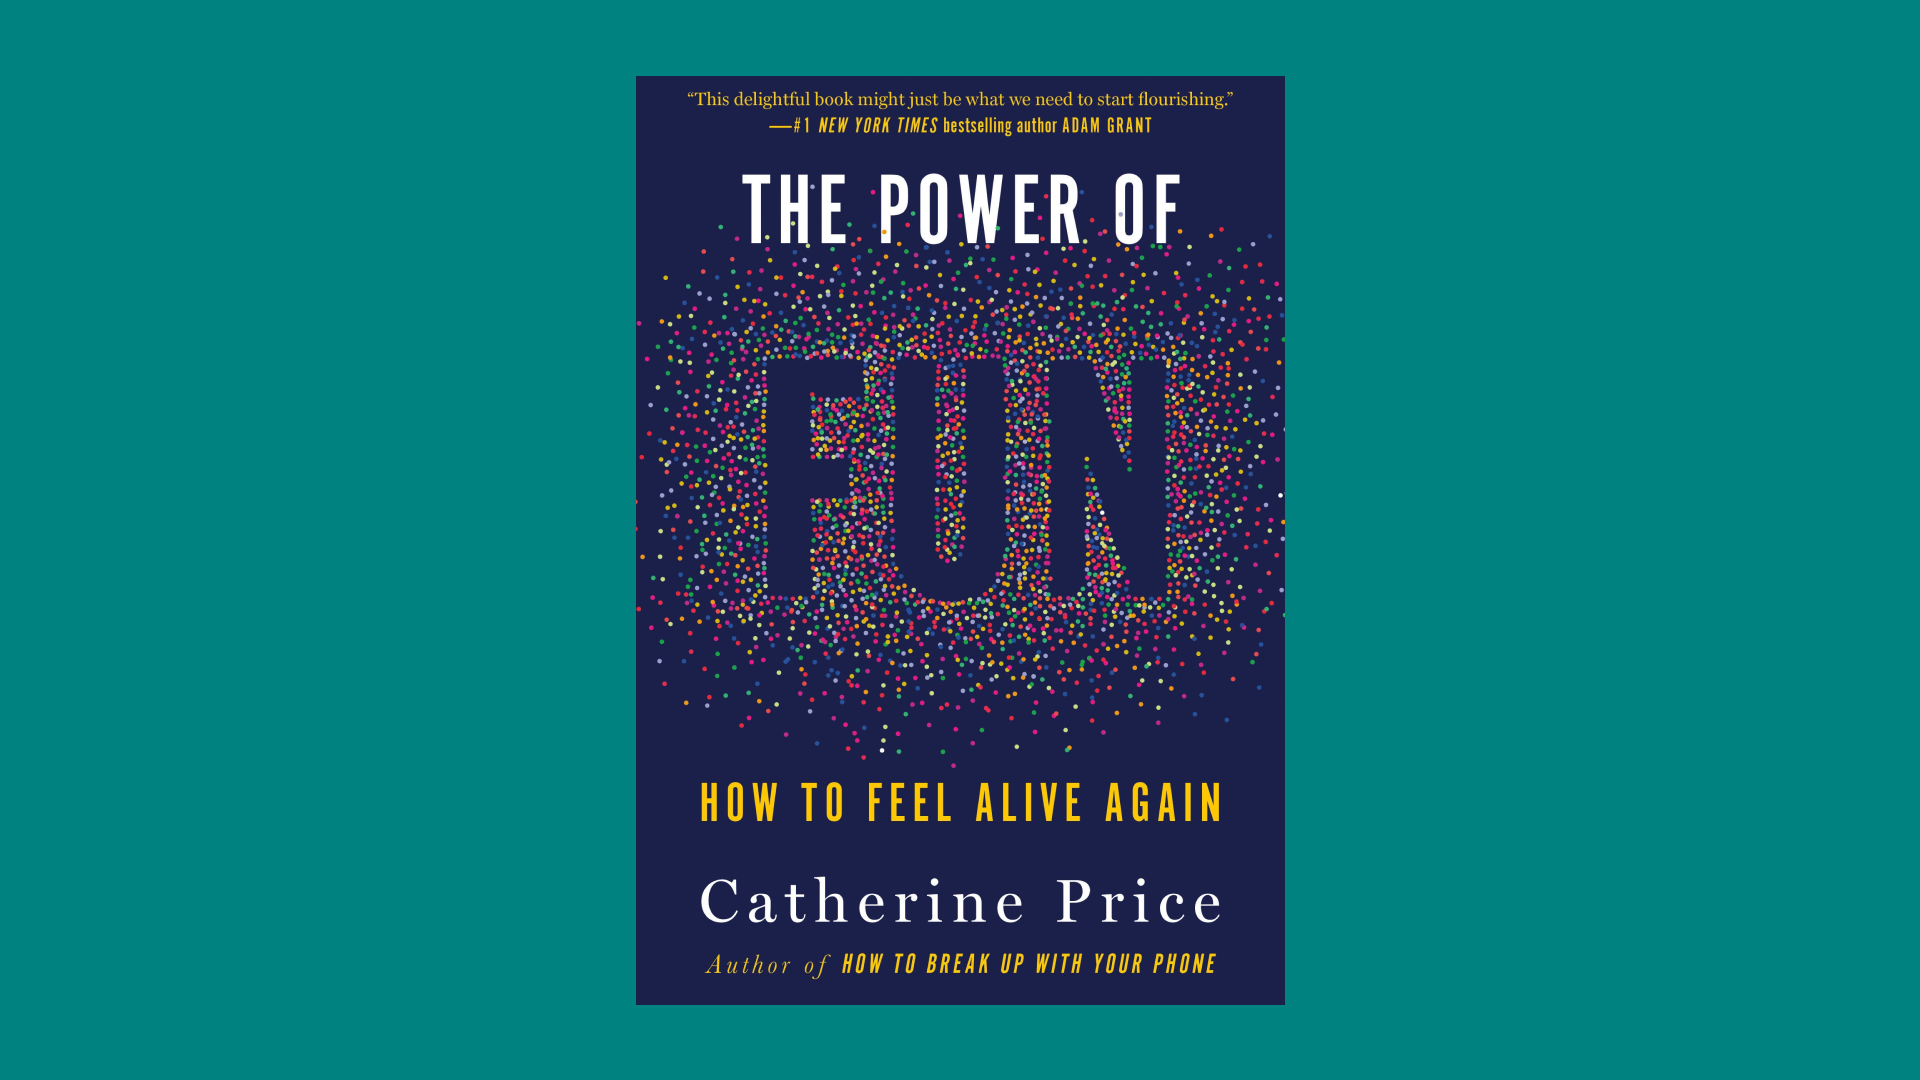 “The Power of Fun: How to Feel Alive Again” by Catherine Price